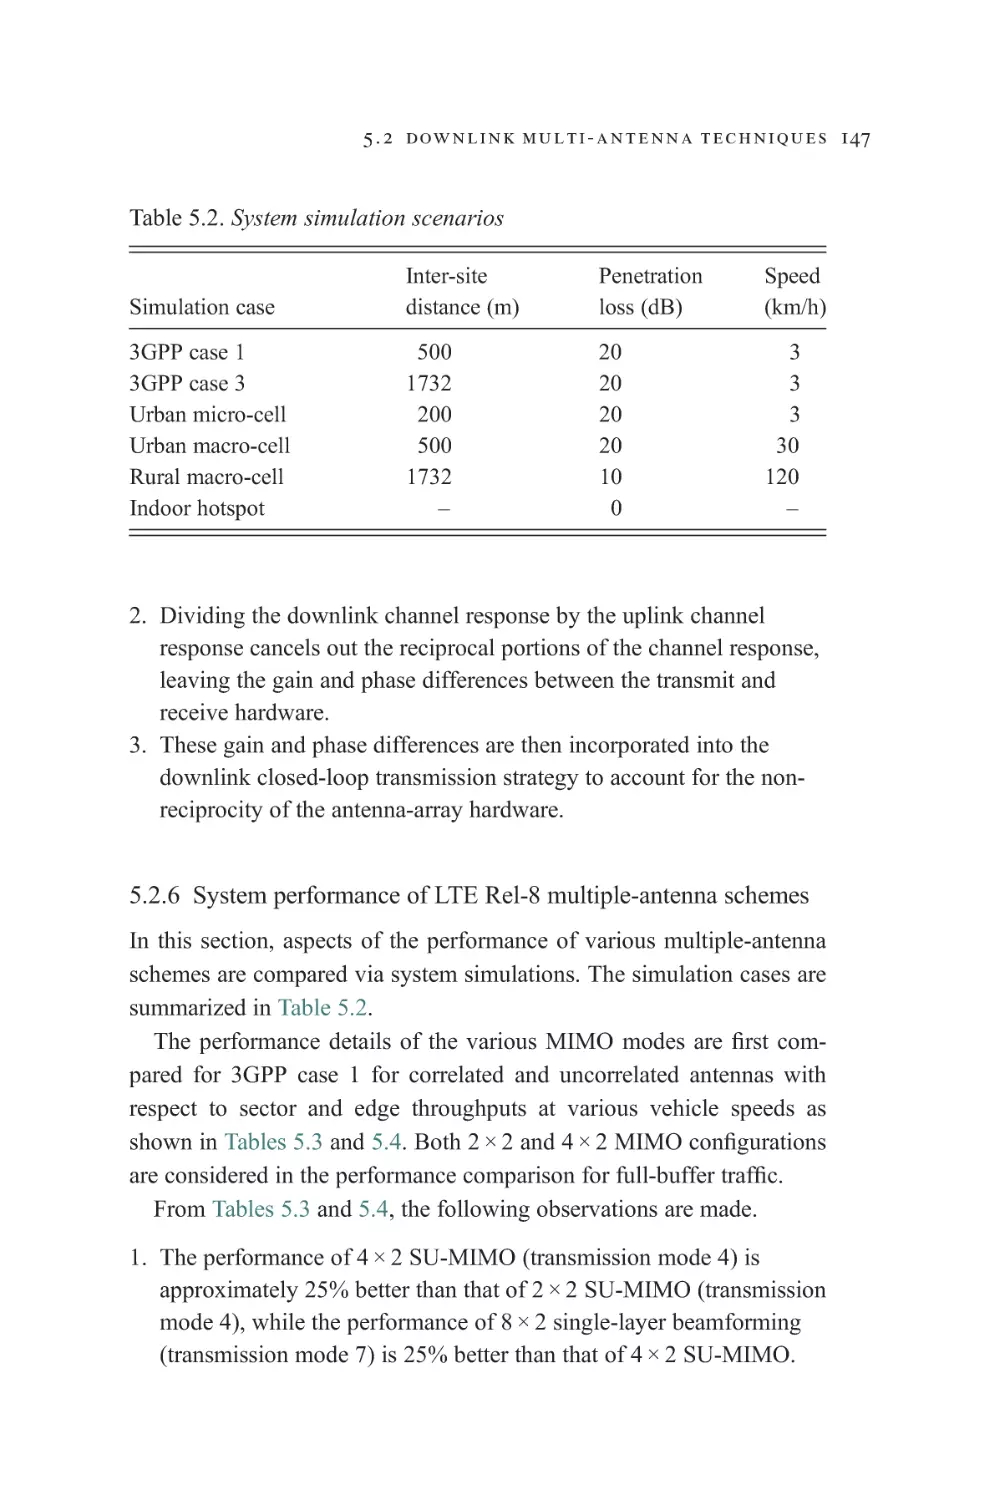 5.2.6 System performance of LTE Rel-8 multiple-antenna schemes